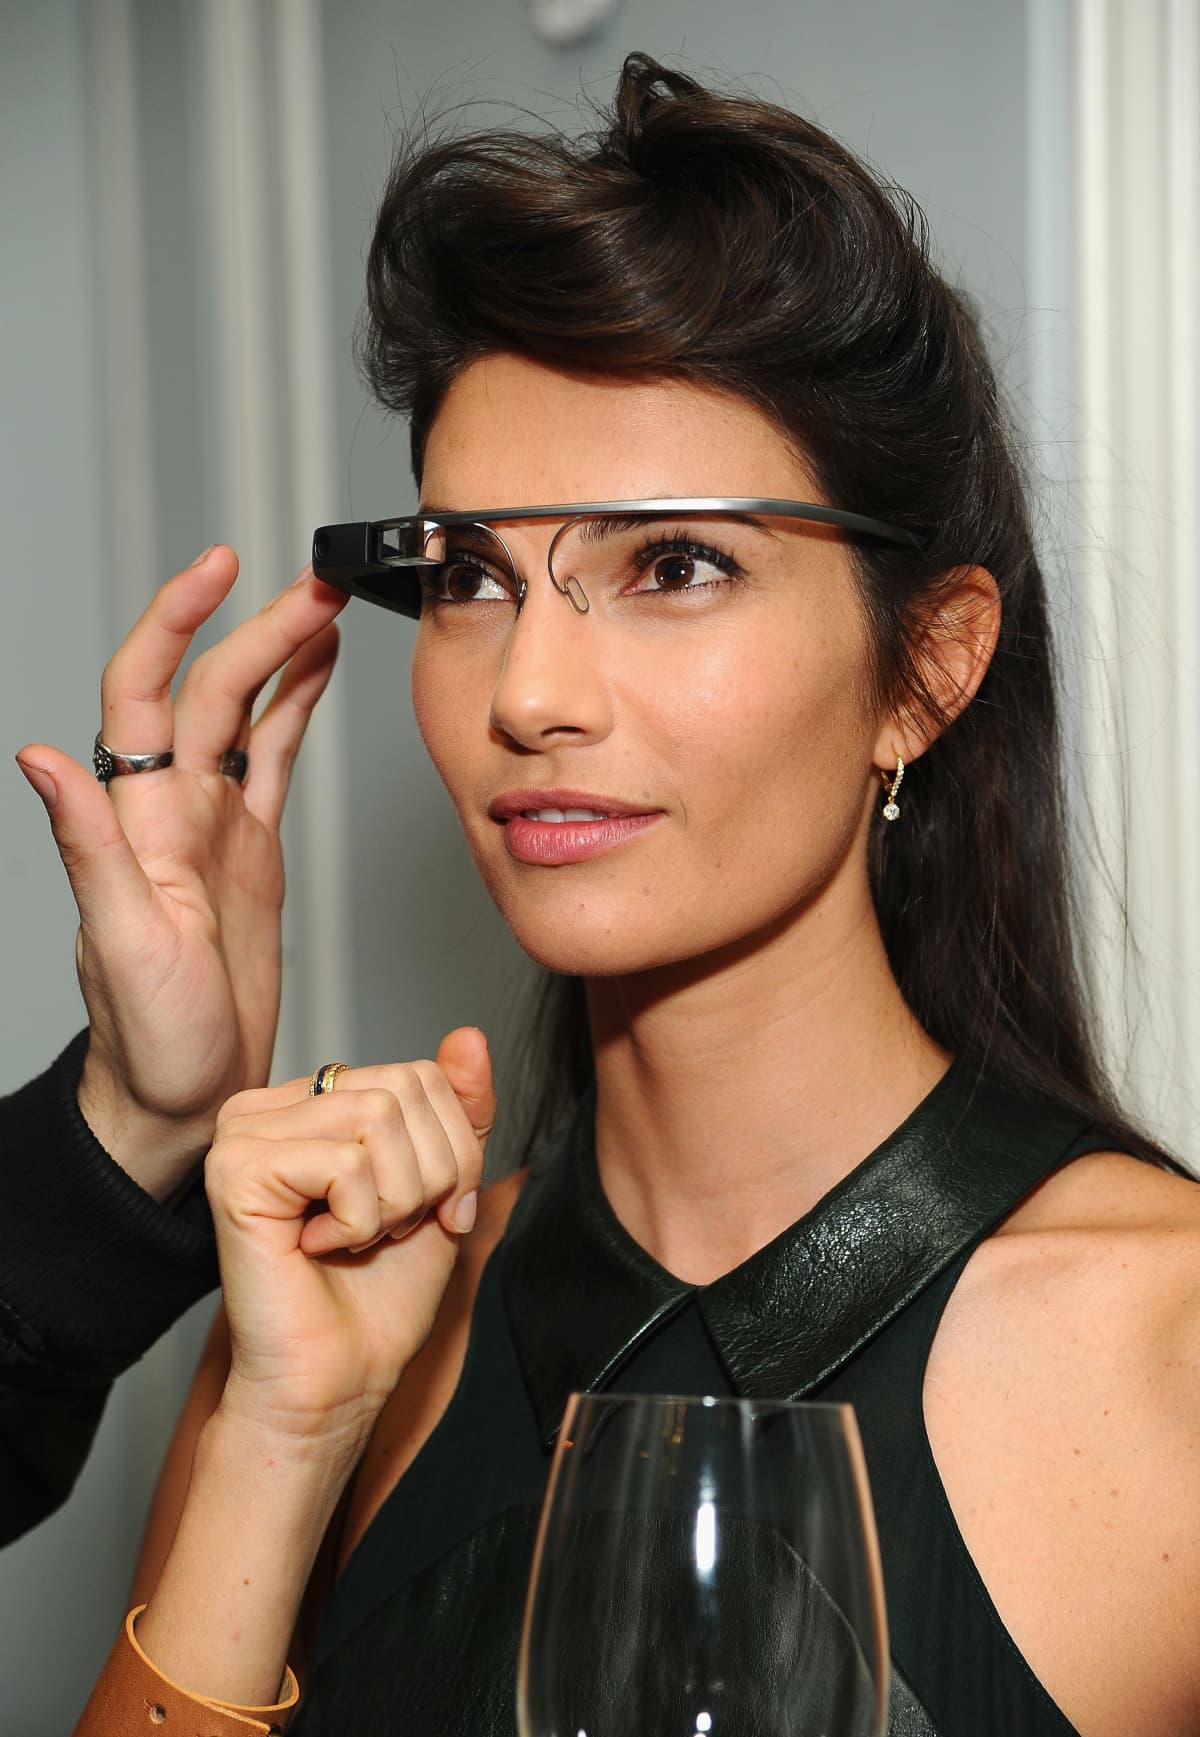 Woman wearing the Google Glass on her face as a man's hand turns on the device